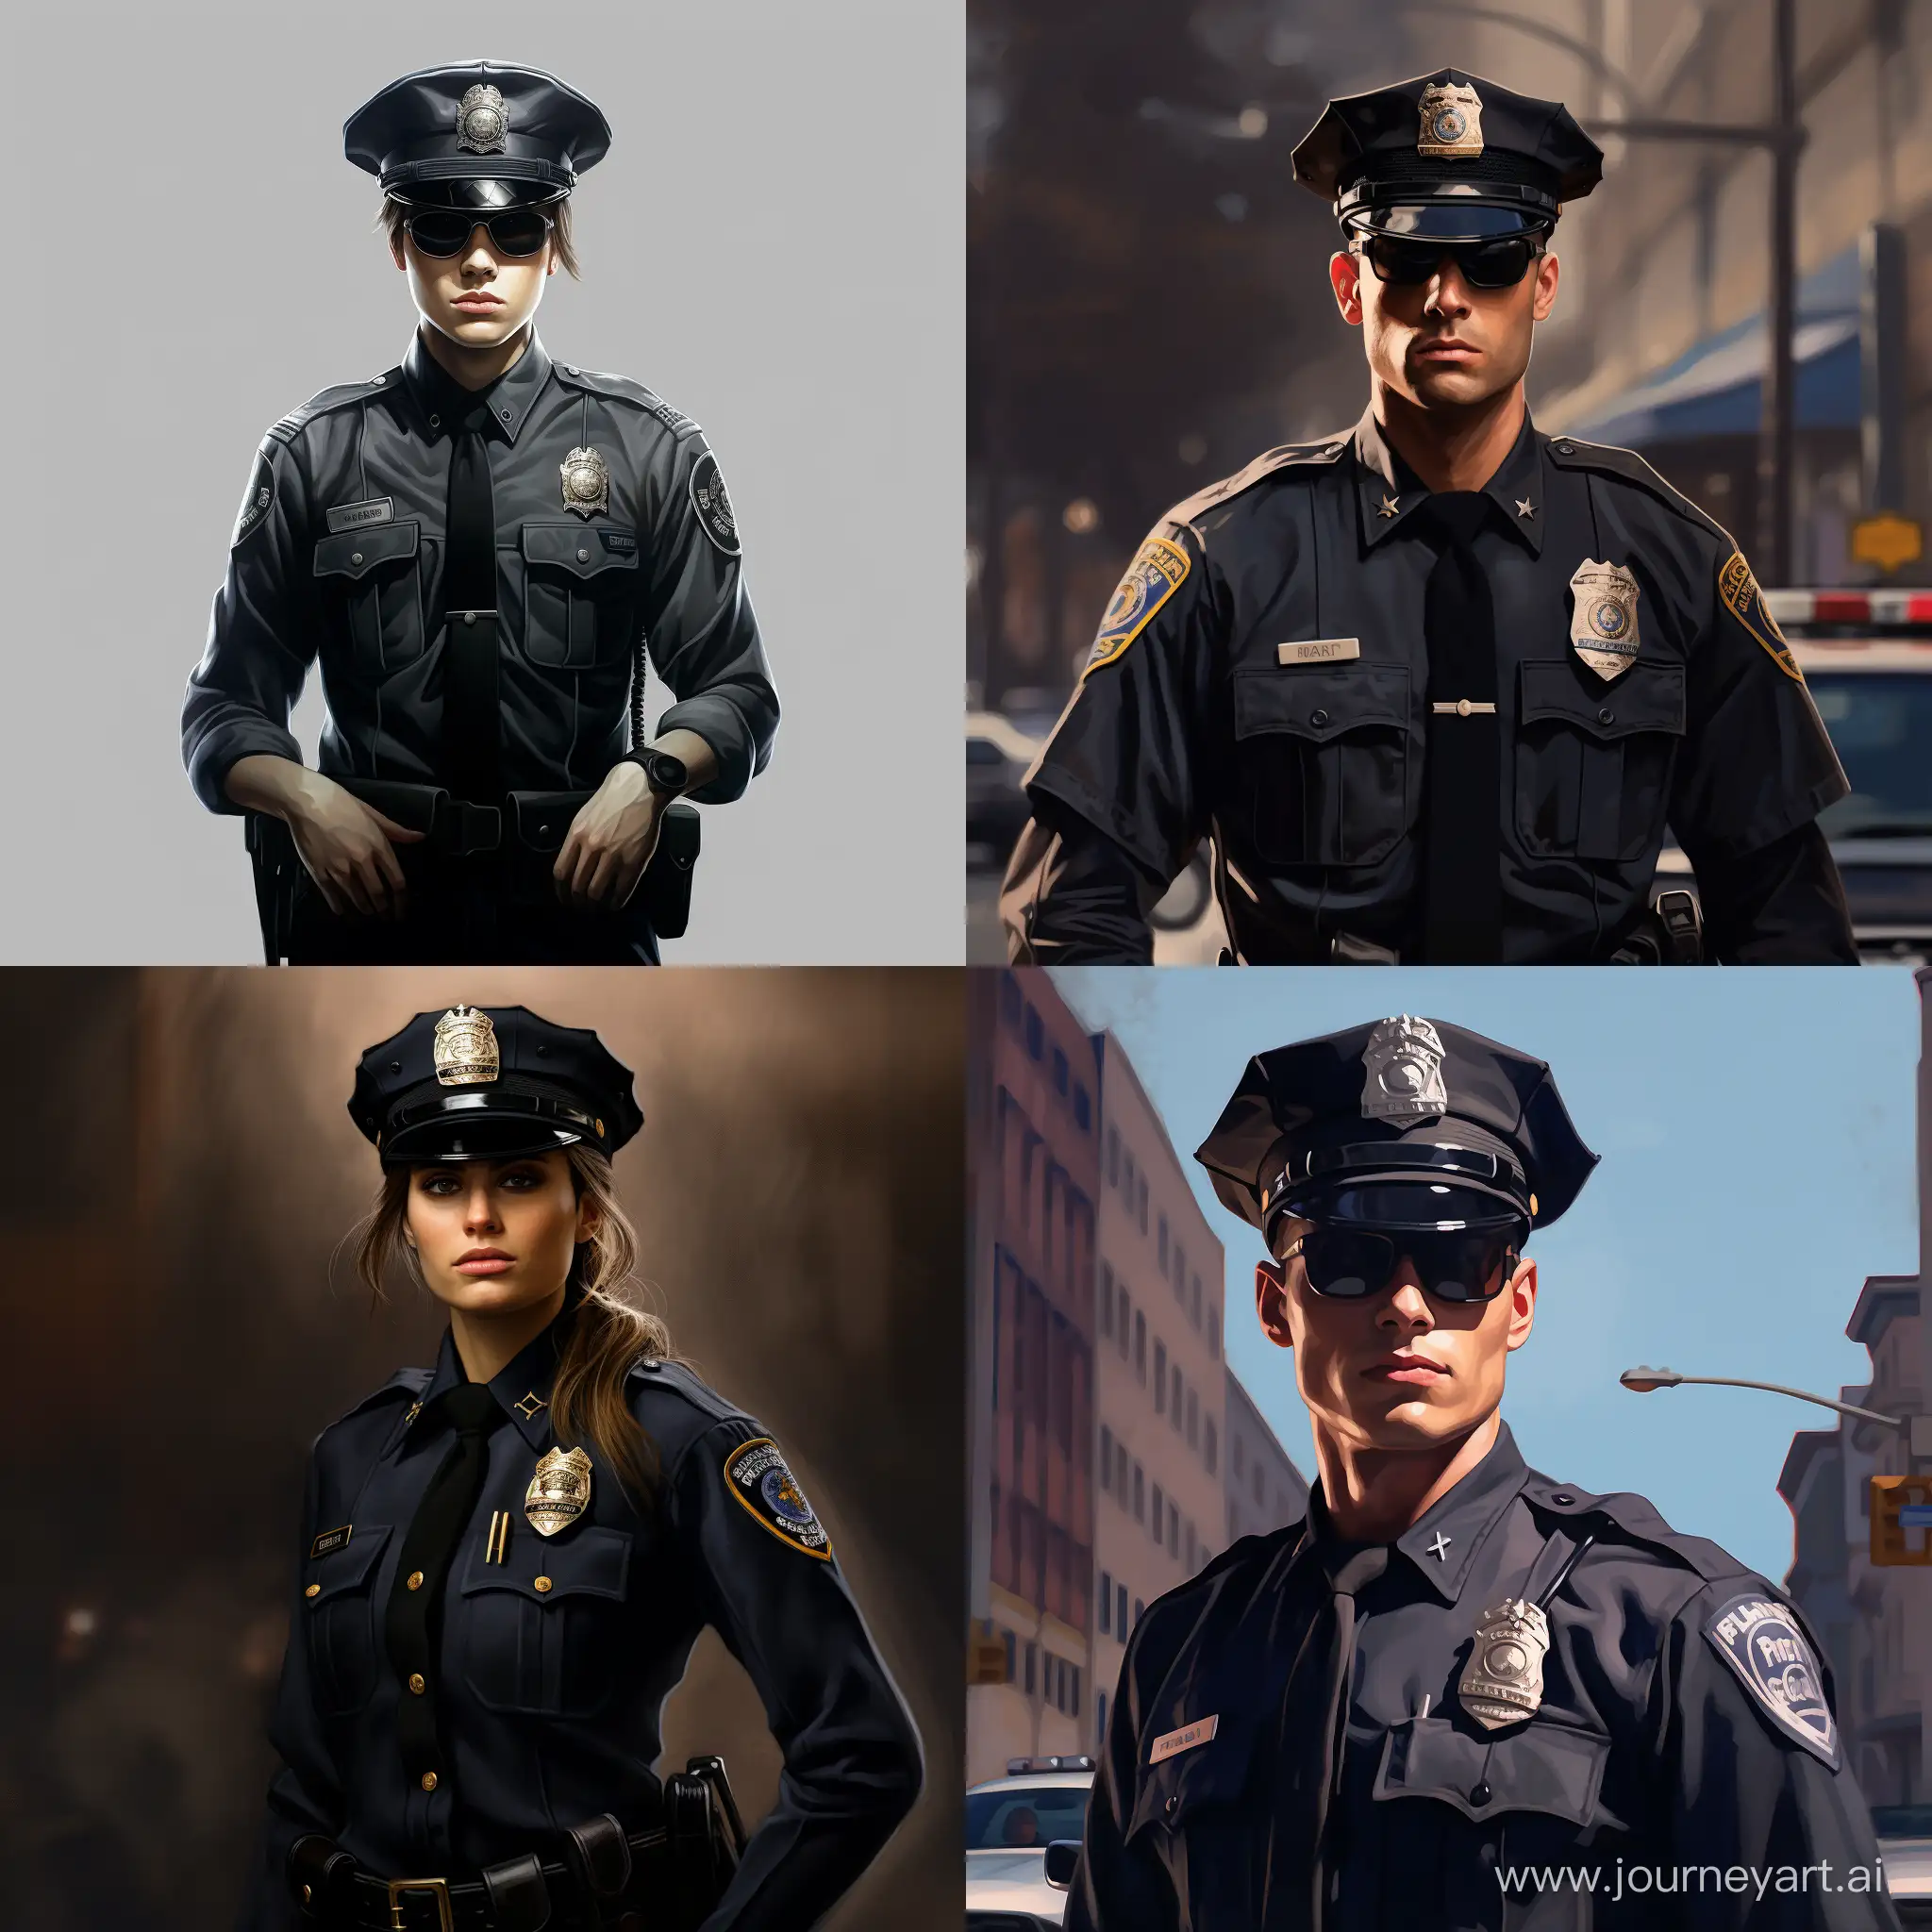 Dedicated-Police-Officer-on-Duty